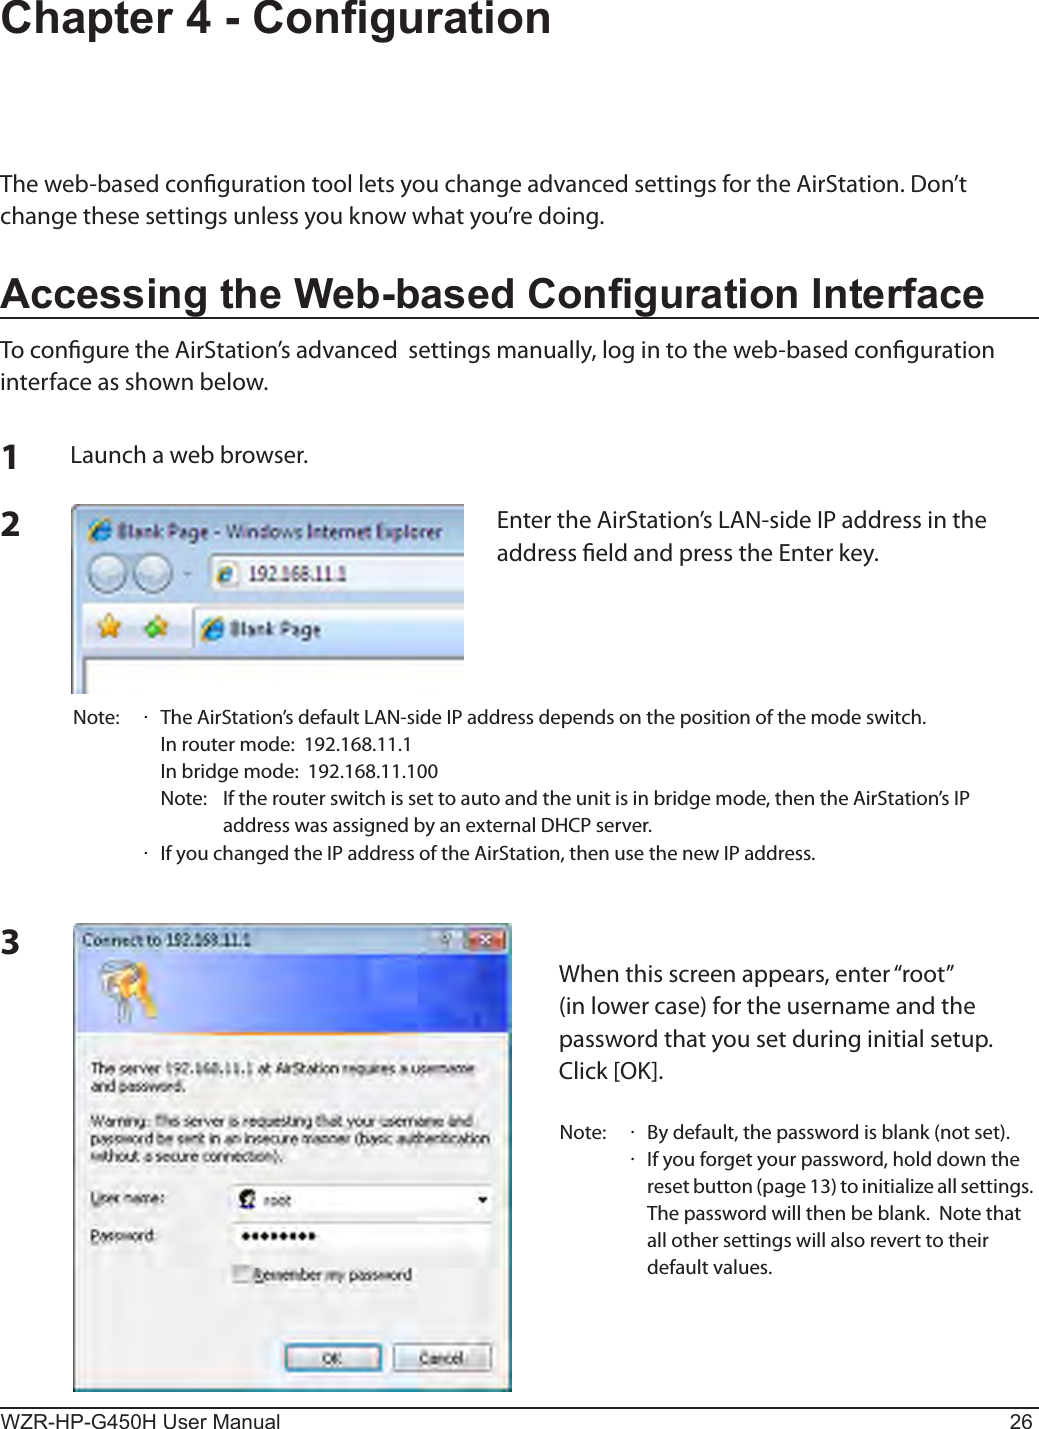 WZR-HP-G450H User Manual 26Chapter 4 - CongurationThe web-based conguration tool lets you change advanced settings for the AirStation. Don’t change these settings unless you know what you’re doing.Accessing the Web-based Conguration InterfaceTo congure the AirStation’s advanced  settings manually, log in to the web-based conguration interface as shown below.123Launch a web browser.Enter the AirStation’s LAN-side IP address in the address eld and press the Enter key.Note:  ·  The AirStation’s default LAN-side IP address depends on the position of the mode switch.  In router mode:  192.168.11.1   In bridge mode:  192.168.11.100   Note:   If the router switch is set to auto and the unit is in bridge mode, then the AirStation’s IP address was assigned by an external DHCP server.  ·  If you changed the IP address of the AirStation, then use the new IP address.When this screen appears, enter “root” (in lower case) for the username and the password that you set during initial setup.  Click [OK].Note:  ·  By default, the password is blank (not set). ·   If you forget your password, hold down the reset button (page 13) to initialize all settings. The password will then be blank.  Note that all other settings will also revert to their default values.